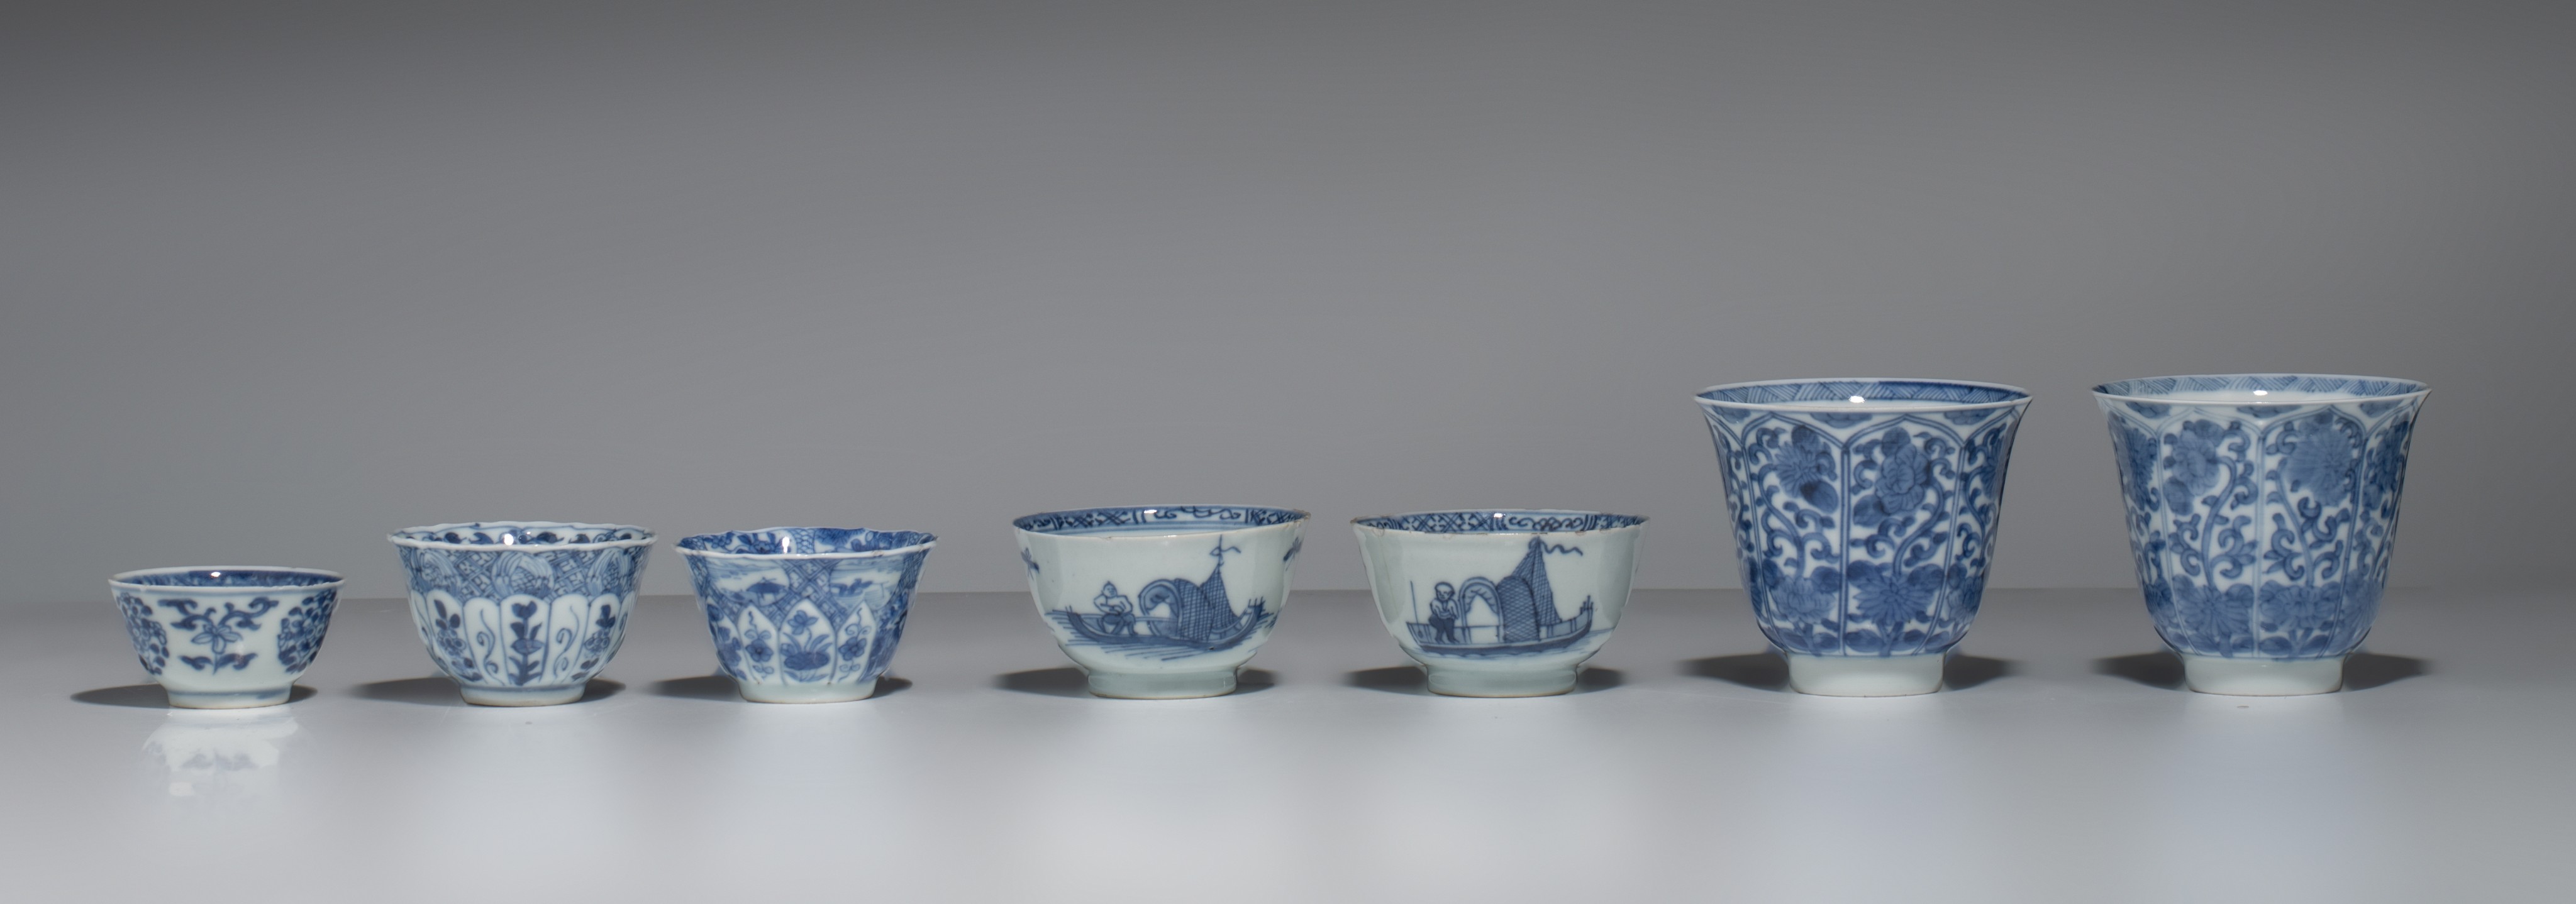 A collection of blue and white tea ware, Kangxi period, largest x cm - Image 8 of 13